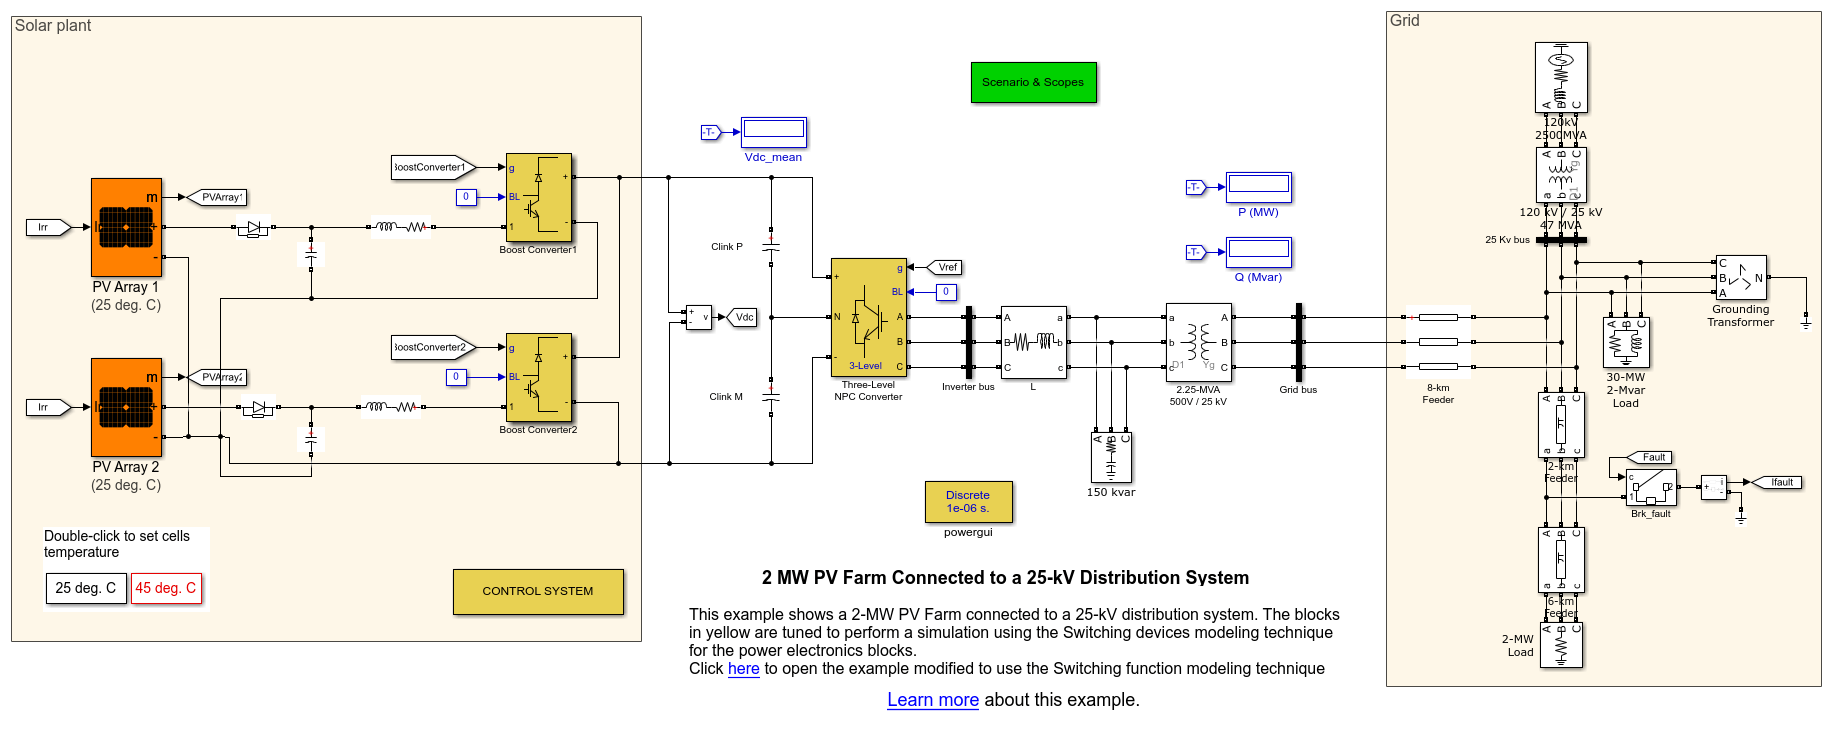 2-MW PV Farm Connected to a 25-kV Distribution System